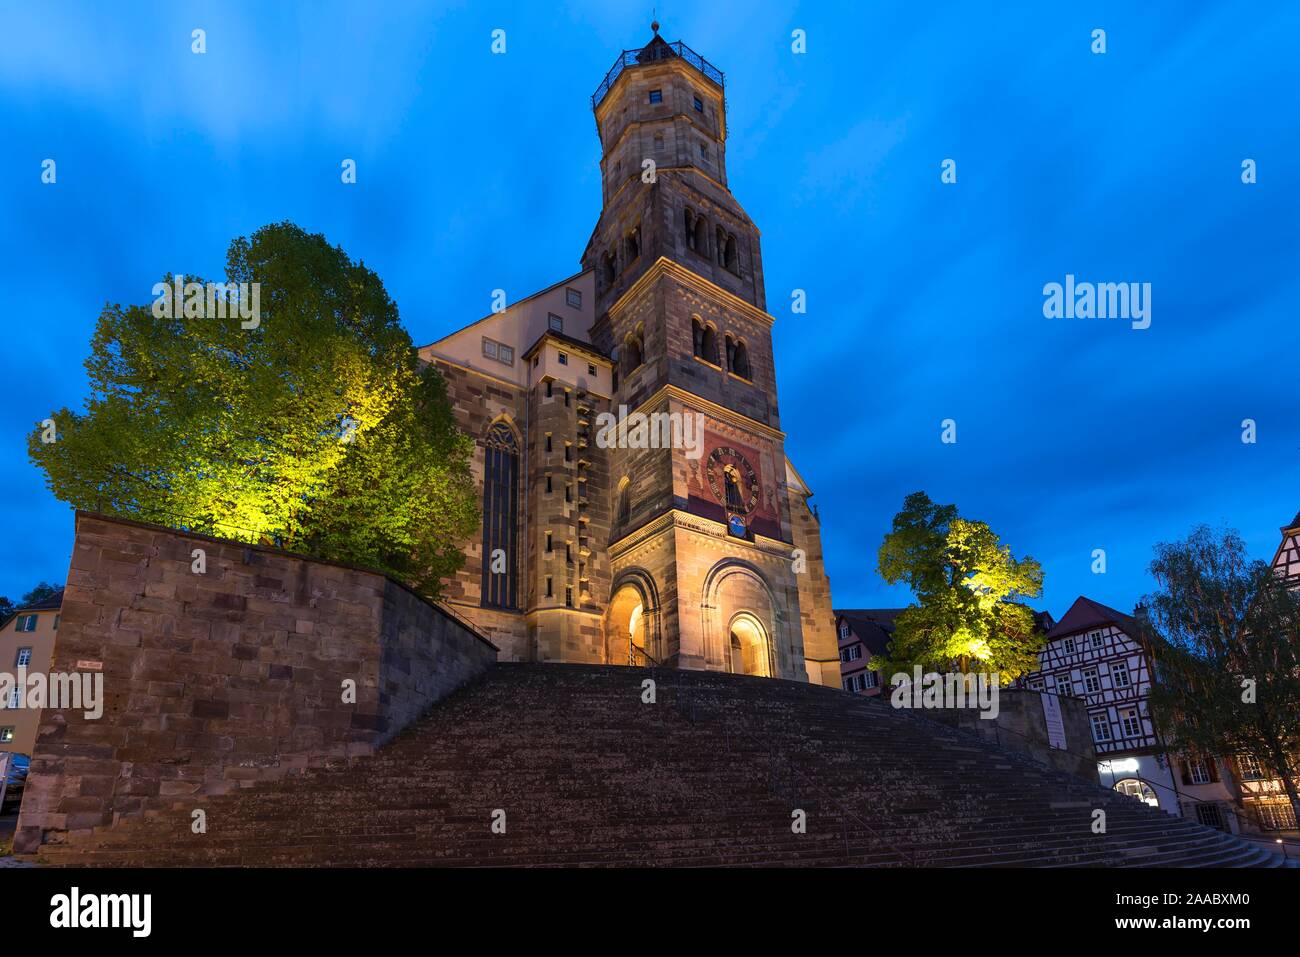 St. Michael with large open stairs at dusk, Schwabisch Hall, Baden-Wurttemberg, Germany Stock Photo